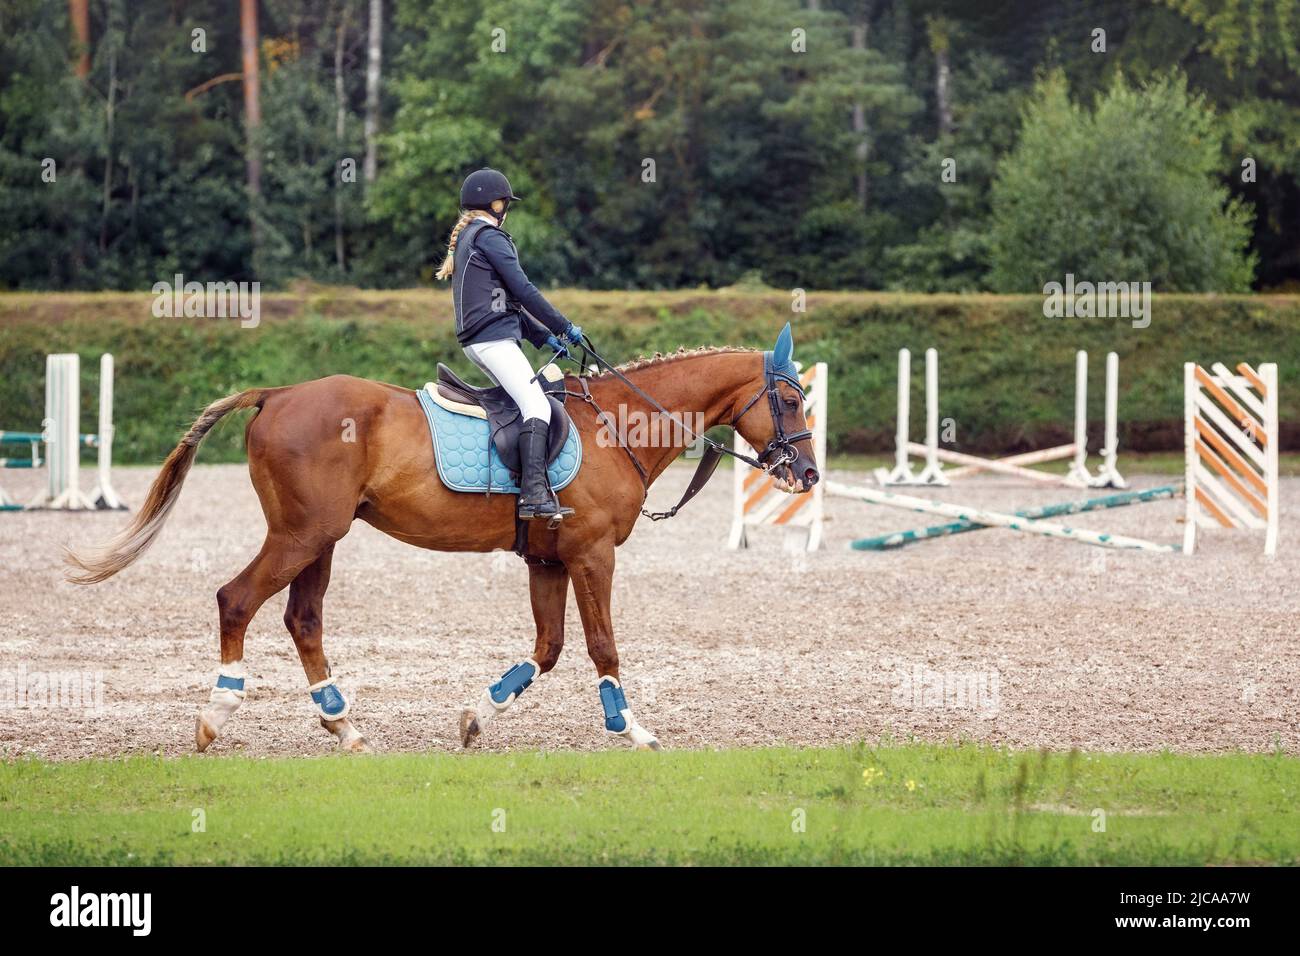 Training process. Young teenage girl riding bay trotting horse on sandy arena practicing at equestrian school. Green nature outdoors horizontal image Stock Photo